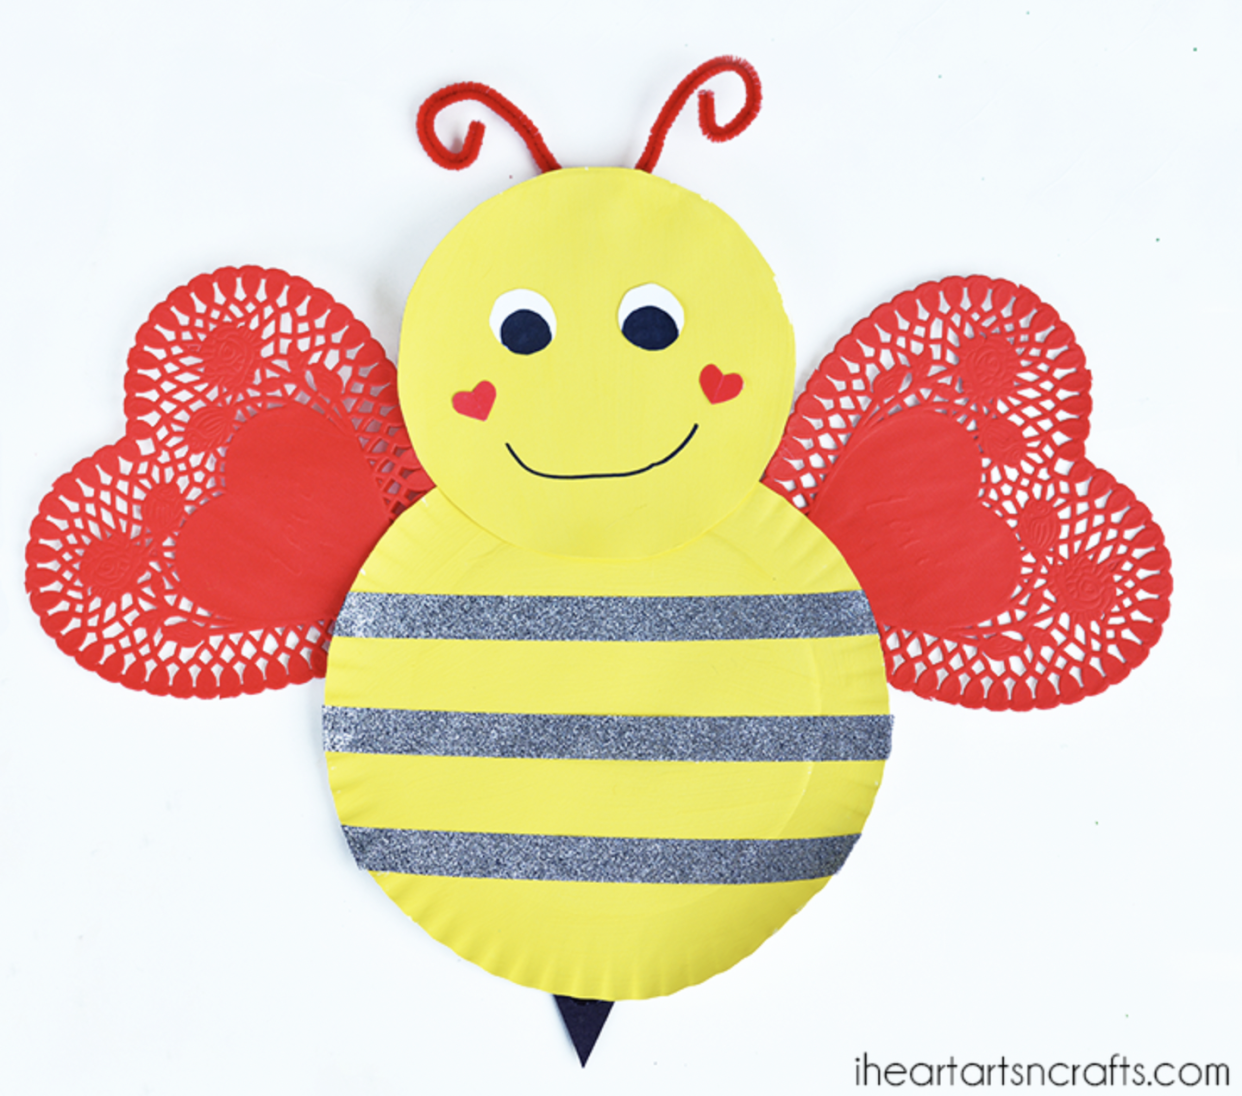 doily bumble bee valentines day crafts for kids